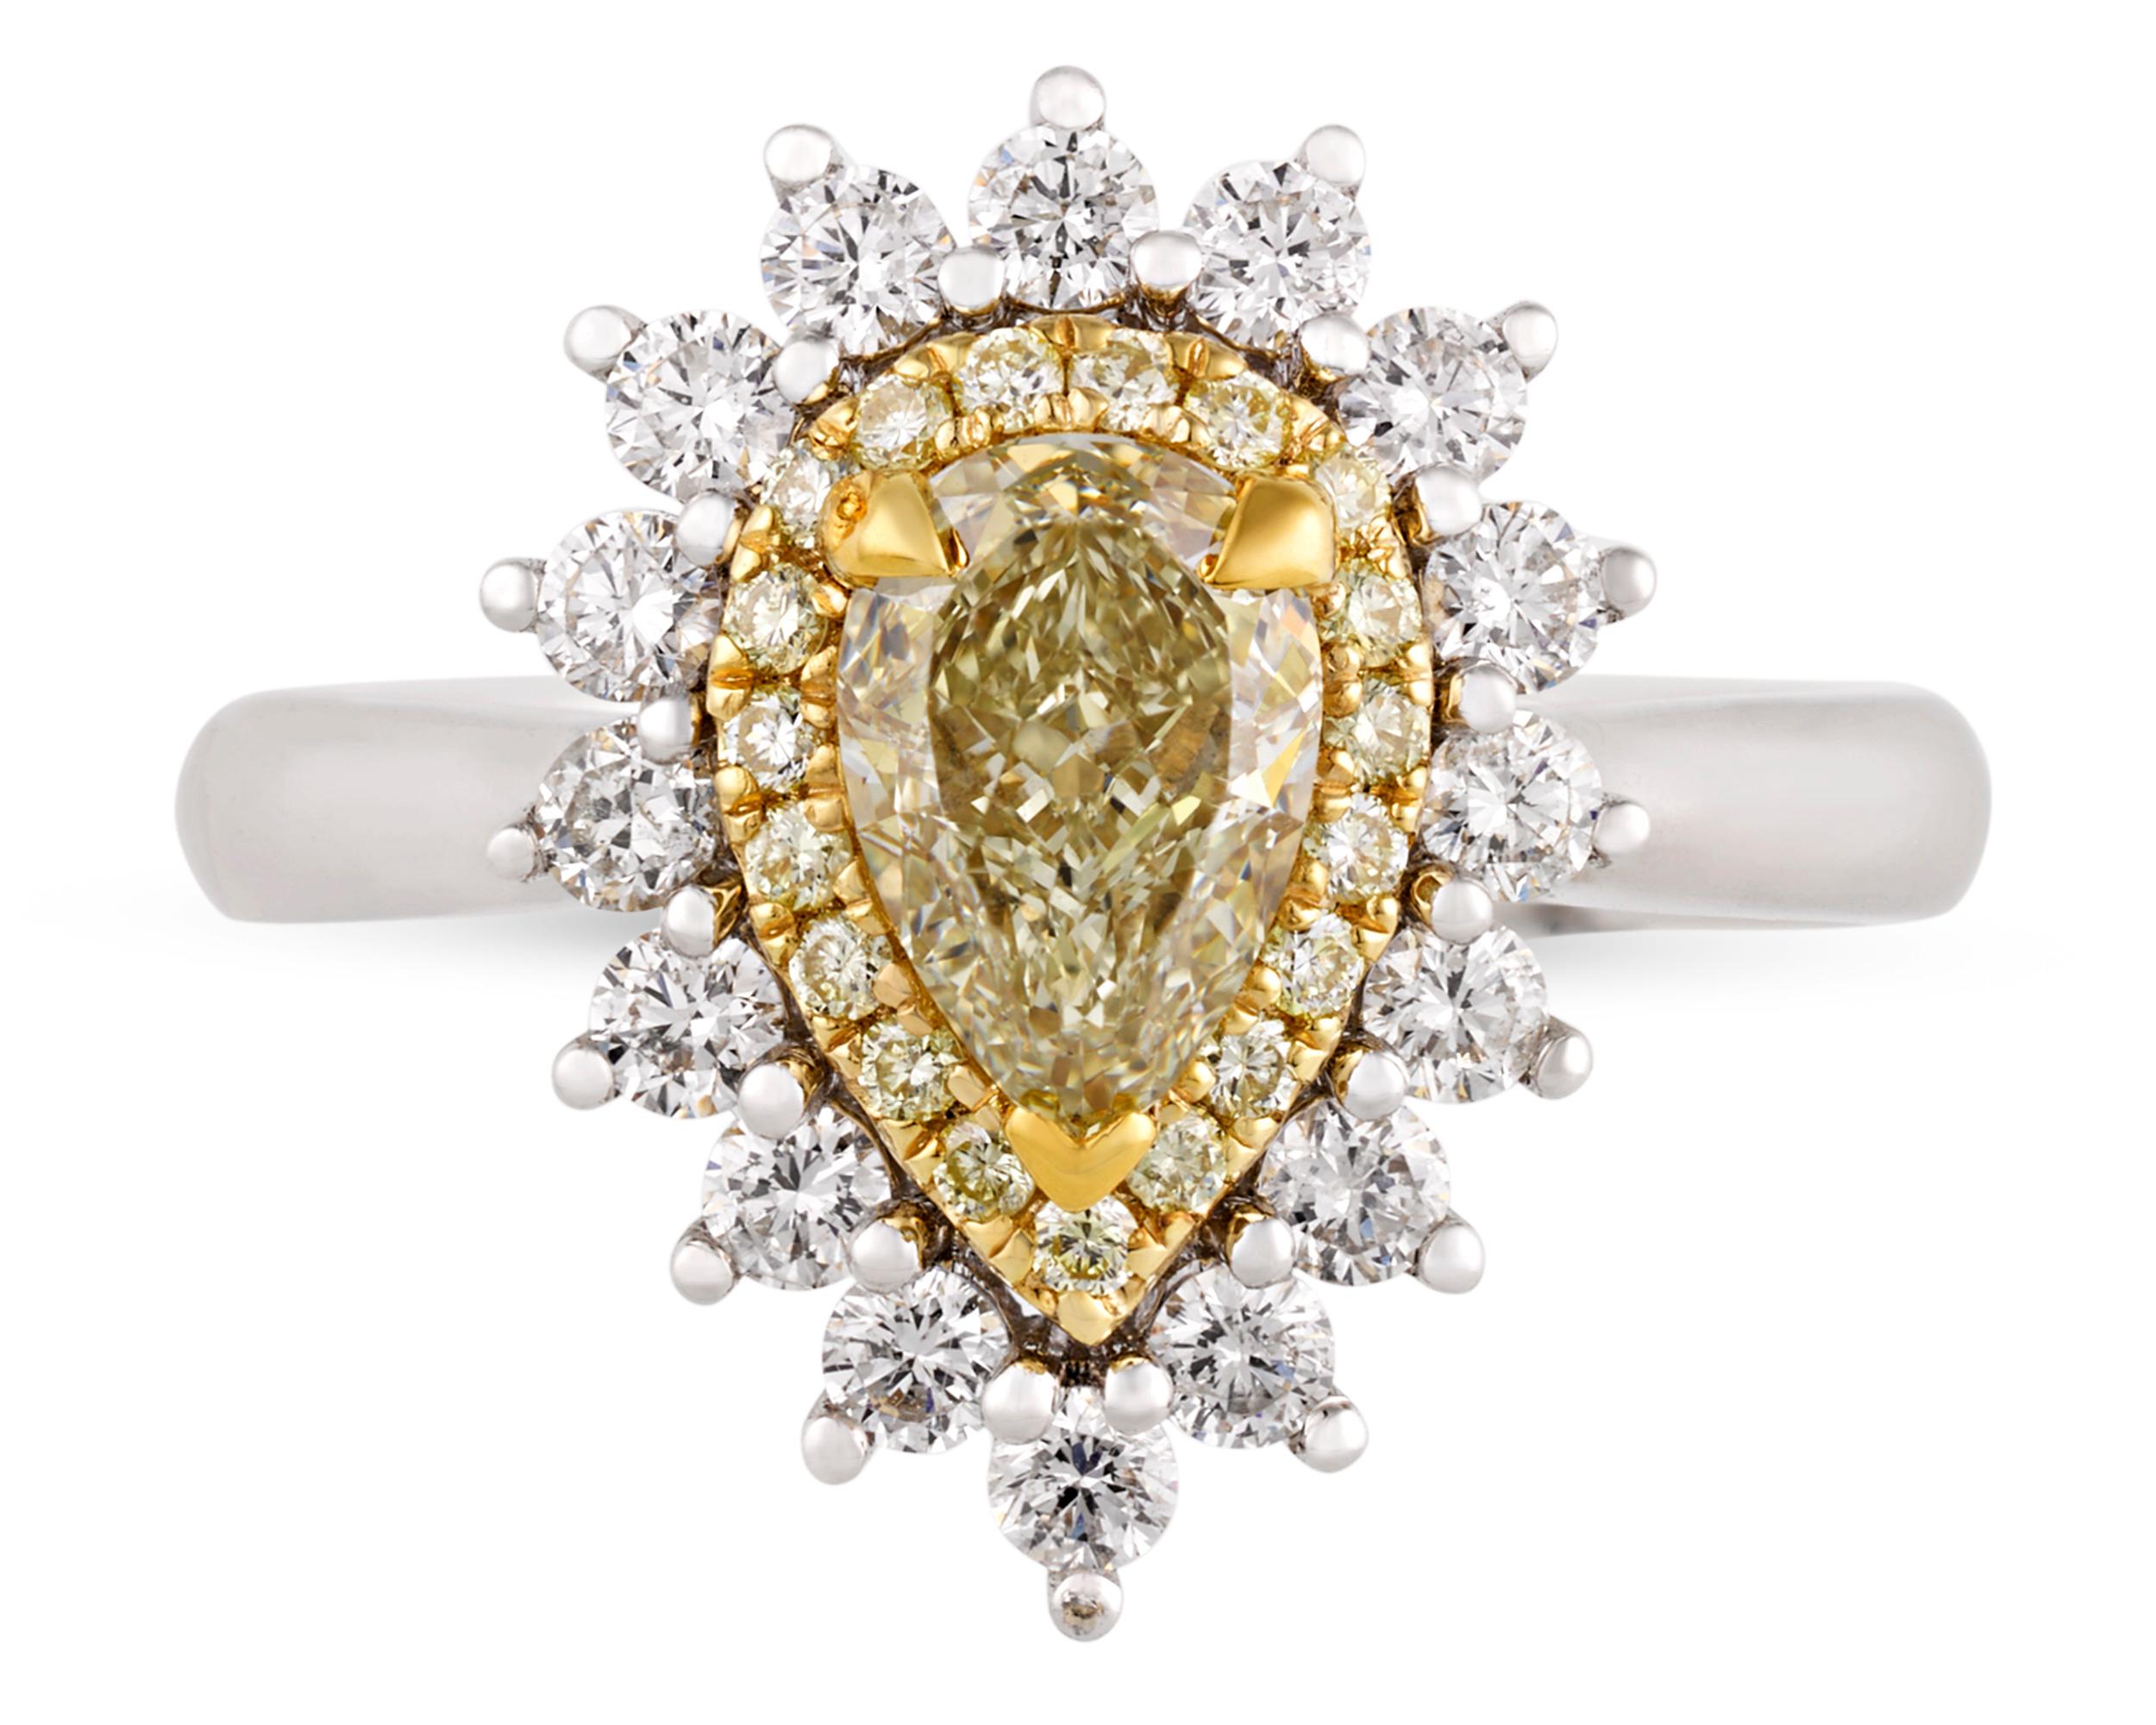 A pear-cut yellow diamond weighing 1.02 carats exudes romantic charm at the center of this ring. The vibrant stone is surrounded by a double halo of white diamonds totaling 0.74 carat for added sparkle and drama, combining stunning brilliance with